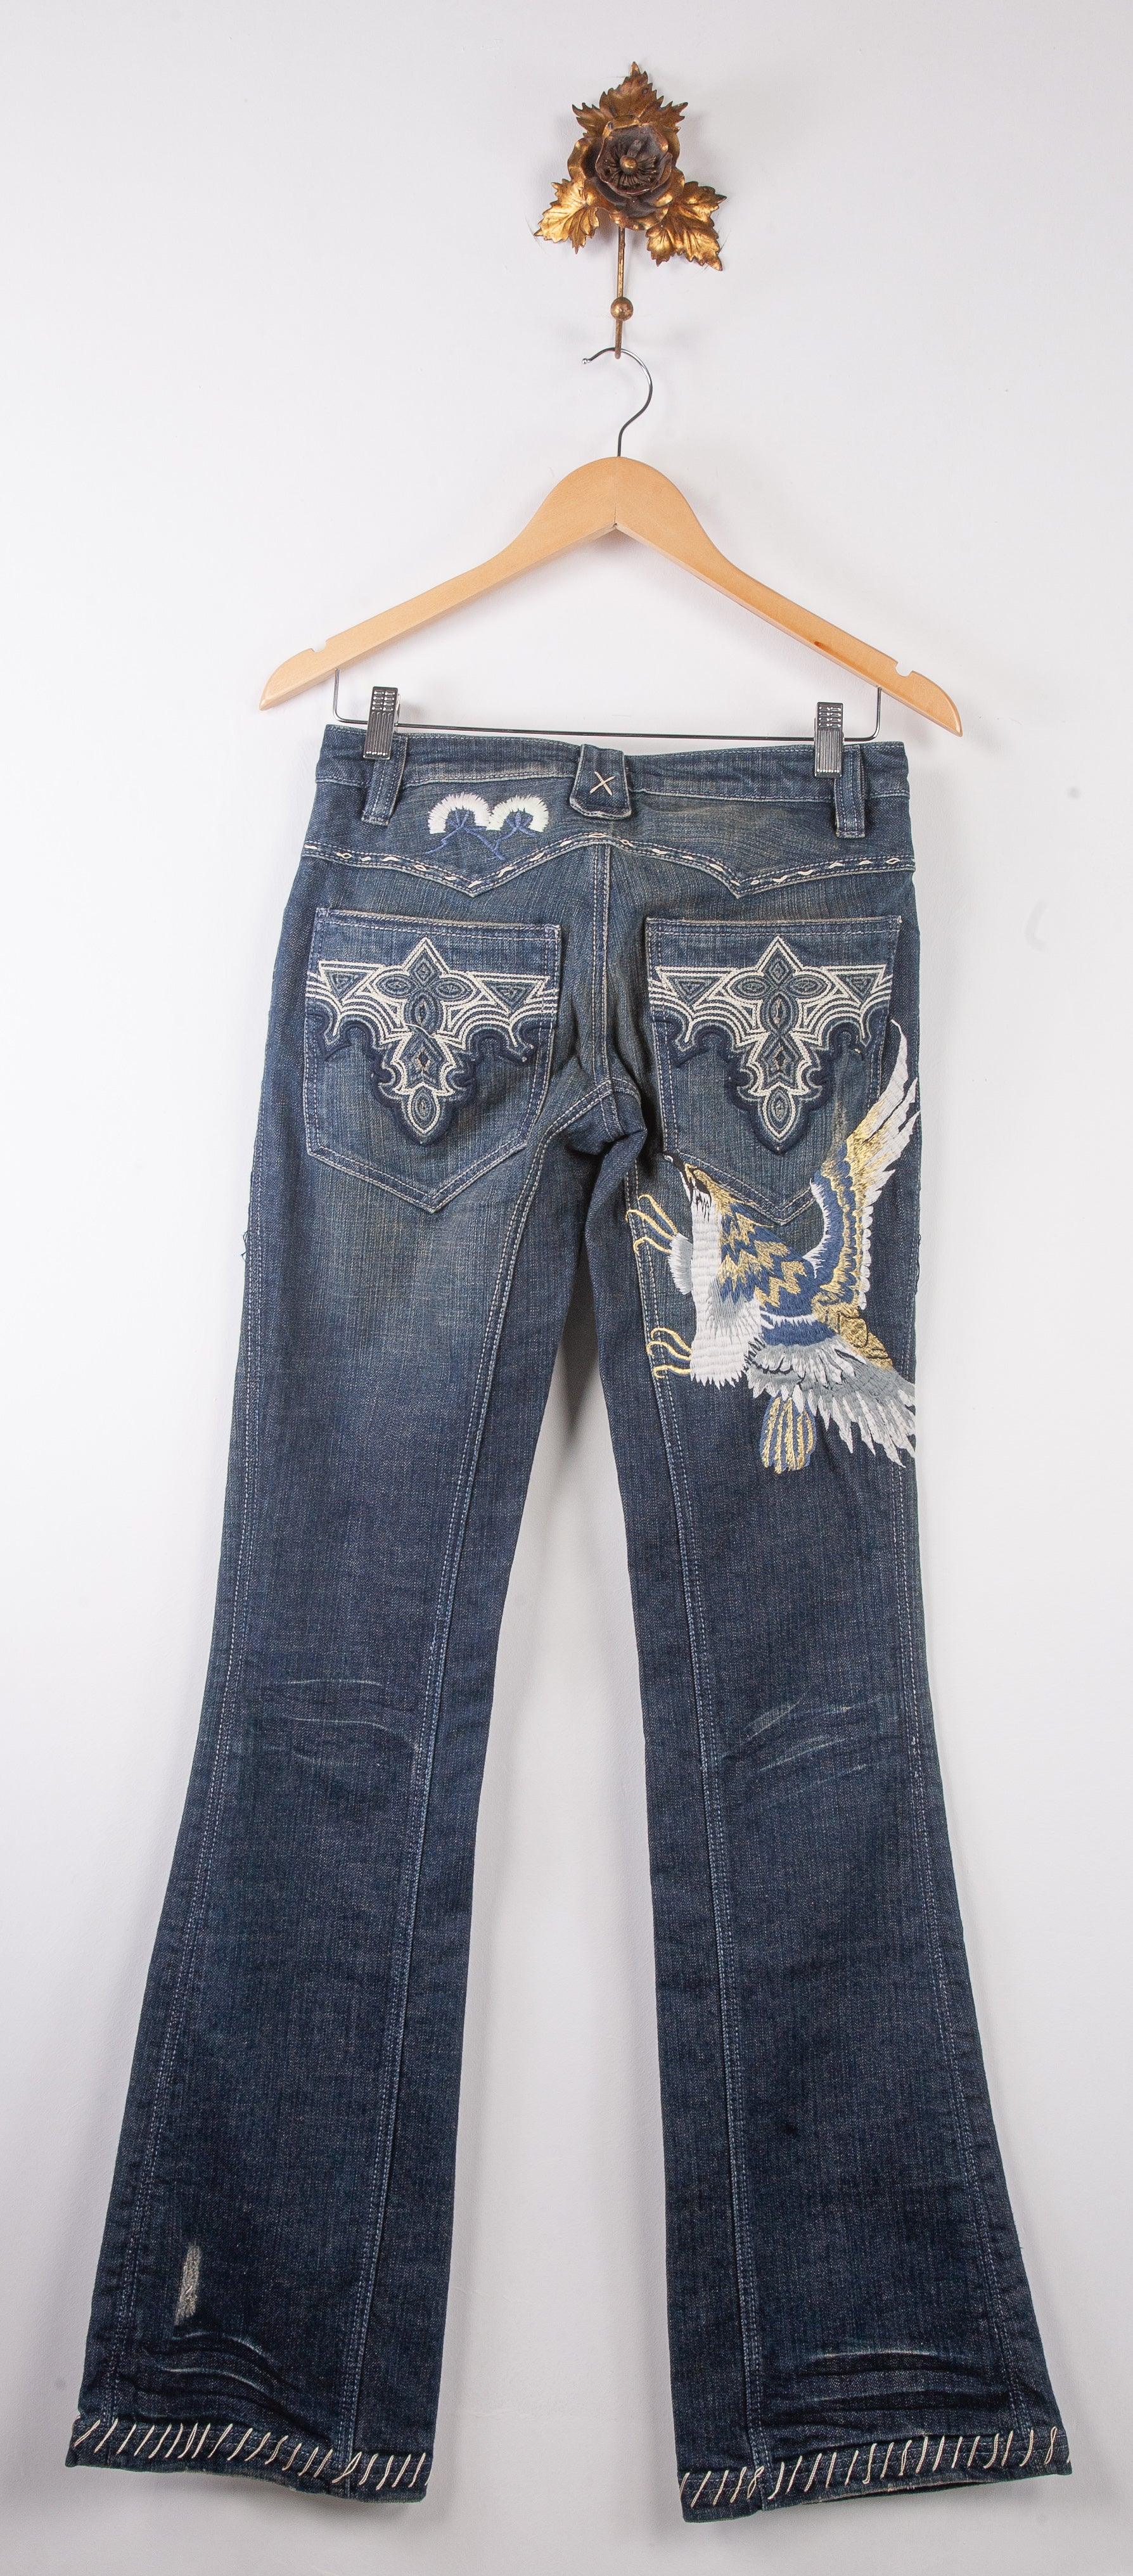 Saks Måne Site line Antik Denim Jeans Flowers, Eagle and Tribal Embroidered with Tags Size 26  Ava & Iva Antik Denim Jeans Flowers, Eagle and Tribal Embroidered with Tags  Size 26 £36.00 GBP £50.00 GBP Default Title - £36.00 SKU: FCR10 Quantity  Share: View Full Details